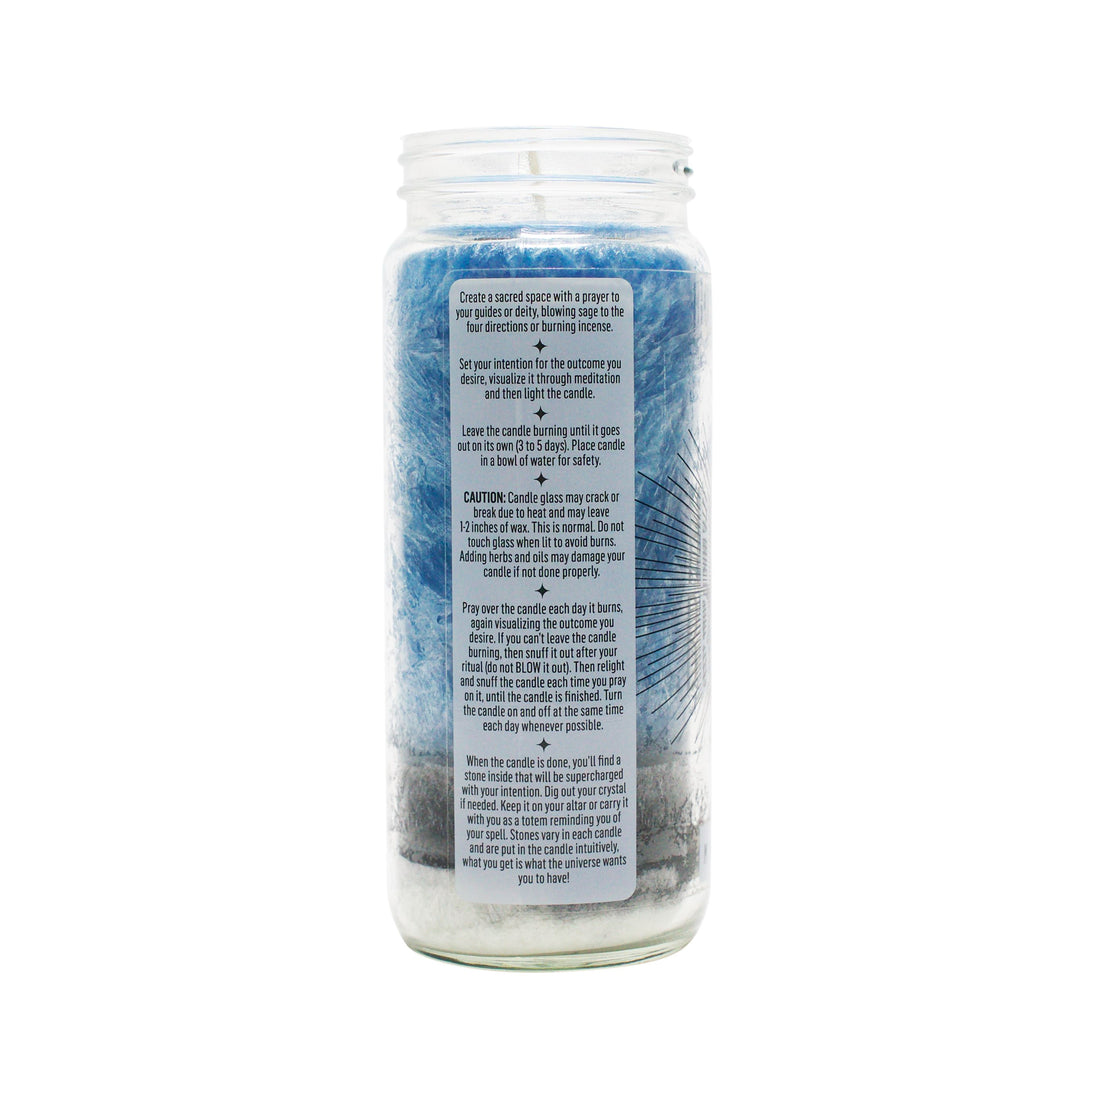 House Blessing Magic Candle Magic Candles House of Intuition 